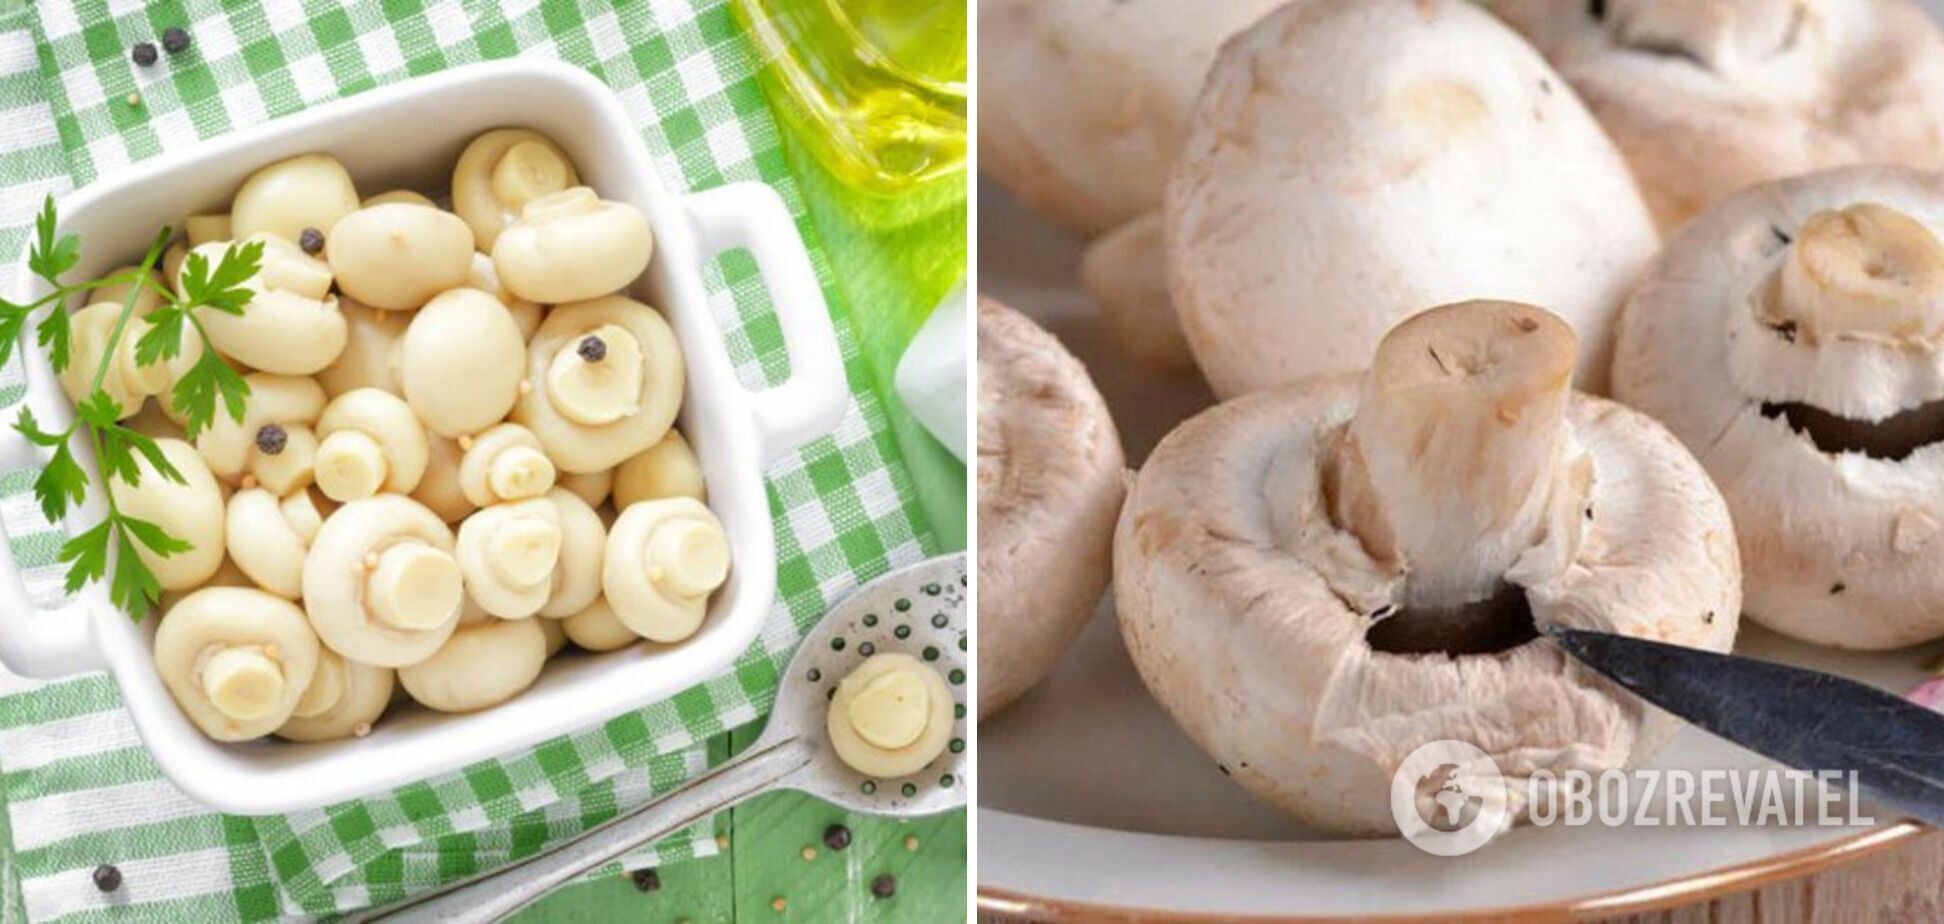 How to cook pickled mushrooms at home